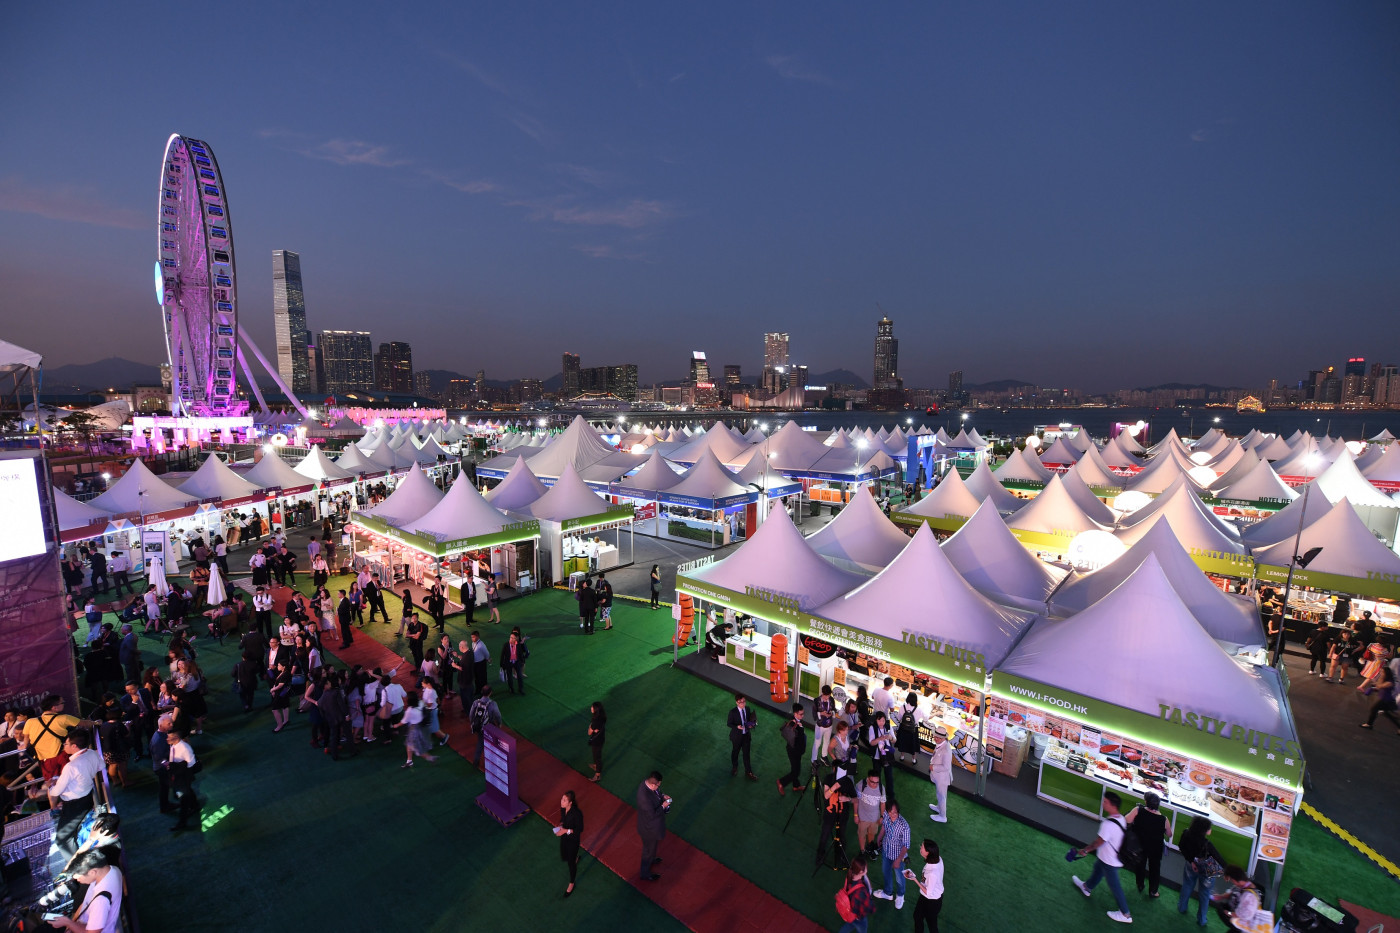 HONG KONG WINE AND DINE FESTIVAL